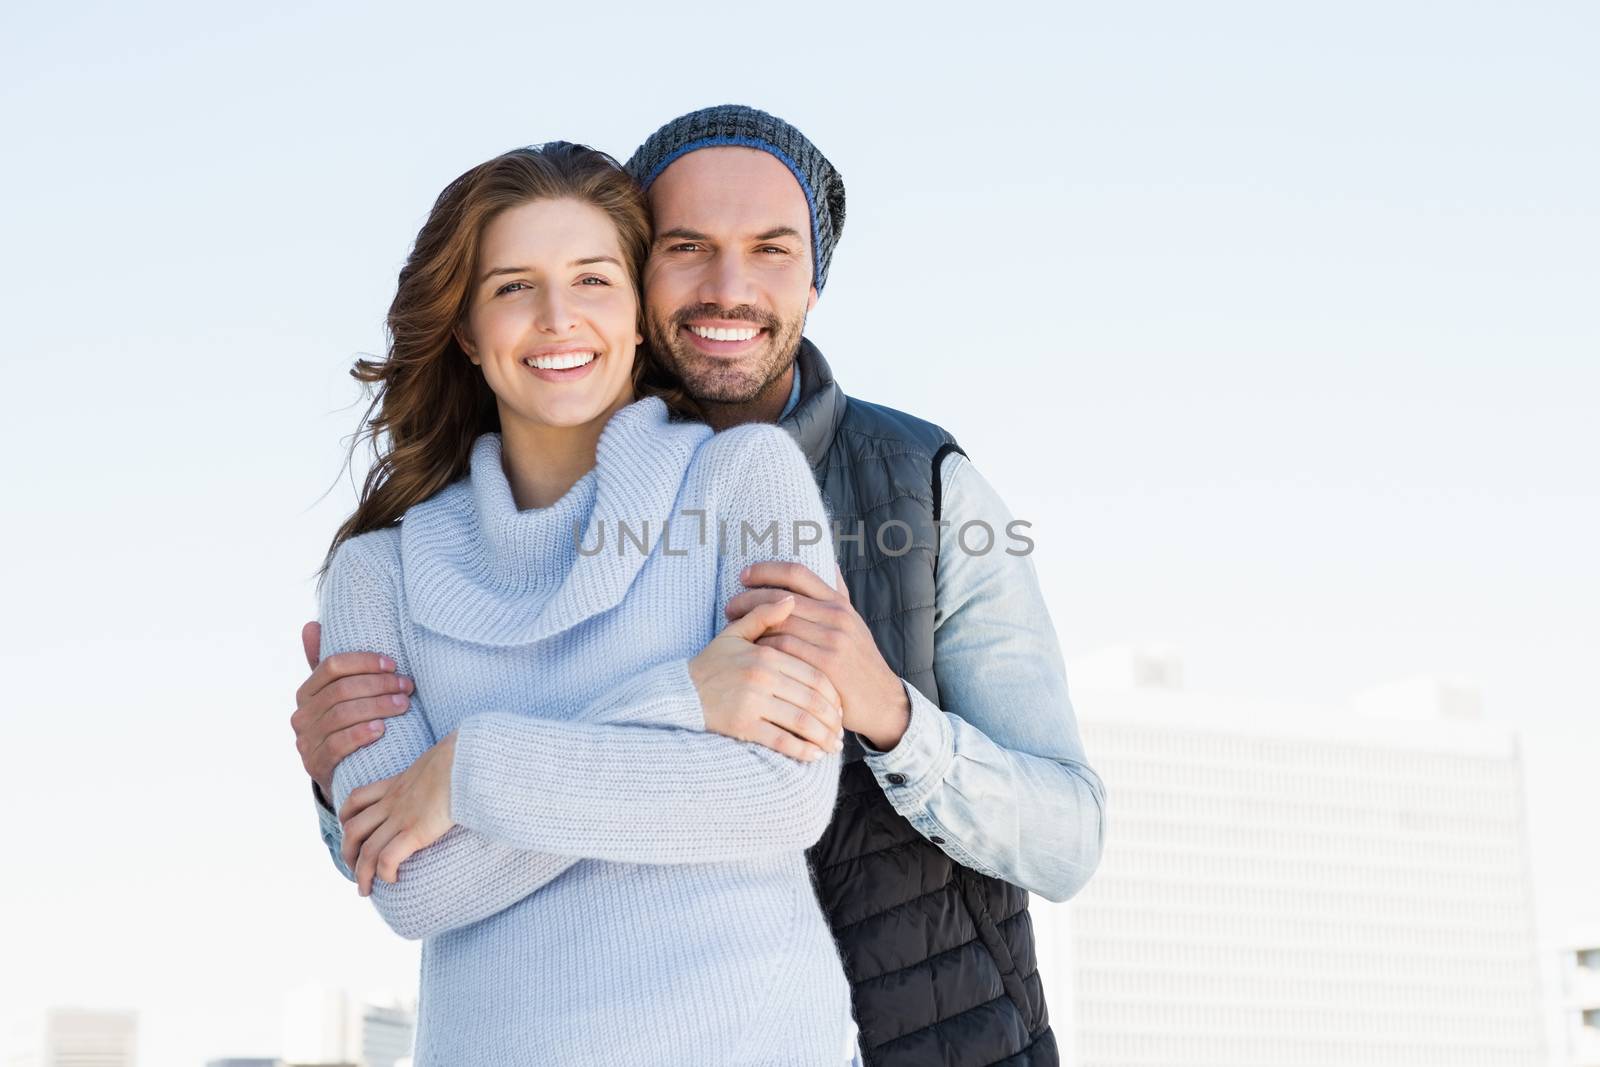 Happy couple embracing each other and smiling outdoors